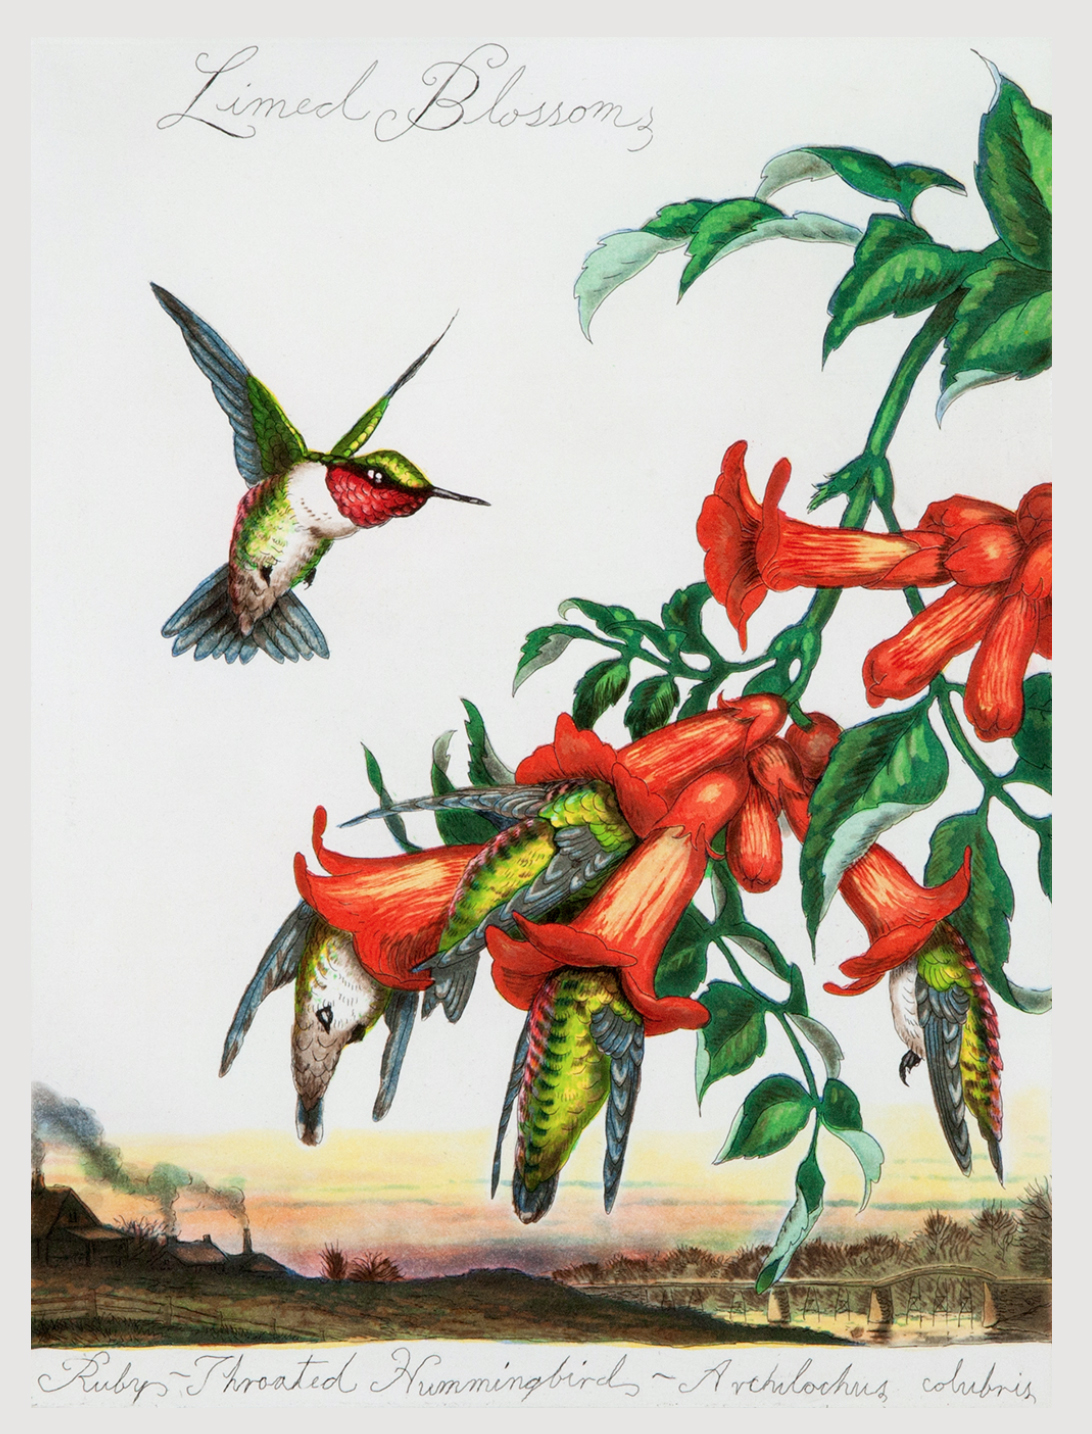 A ruby-throated hummingbird approaches a cluster of blossoms, with other hummingbirds trapped in the blooms.